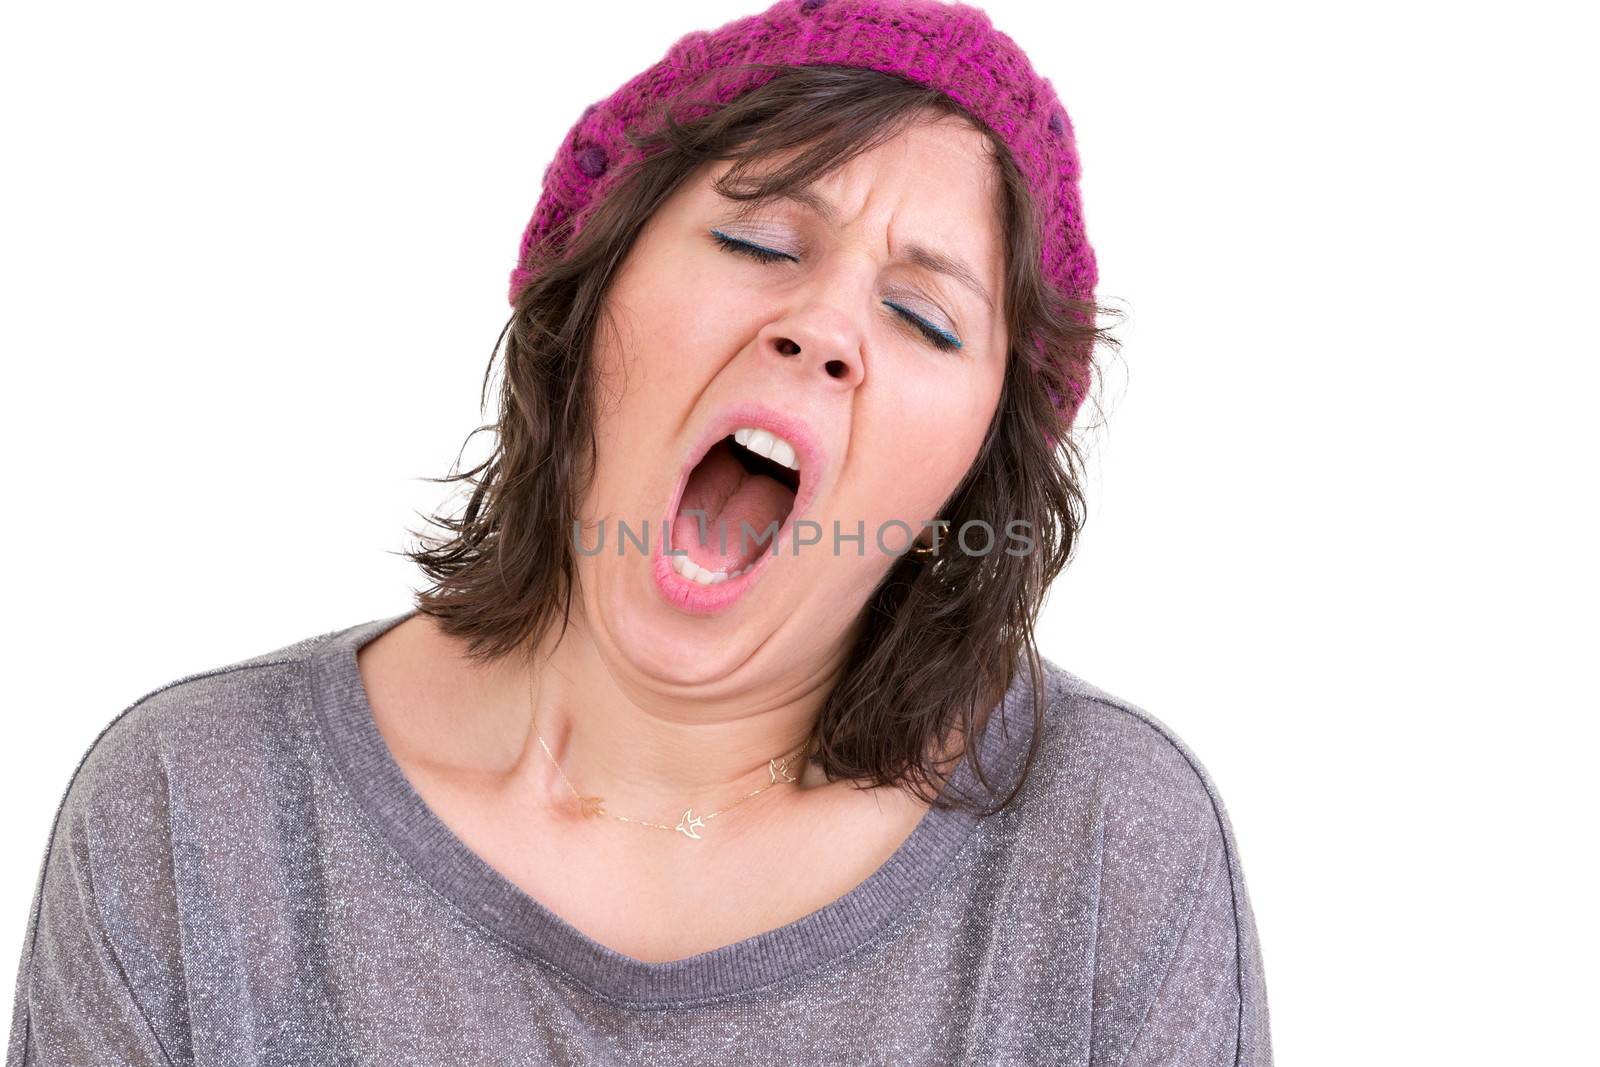 Exhausted or bored woman wearing a knitted beanie yawning with her mouth wide open and eyes shut isolated on white